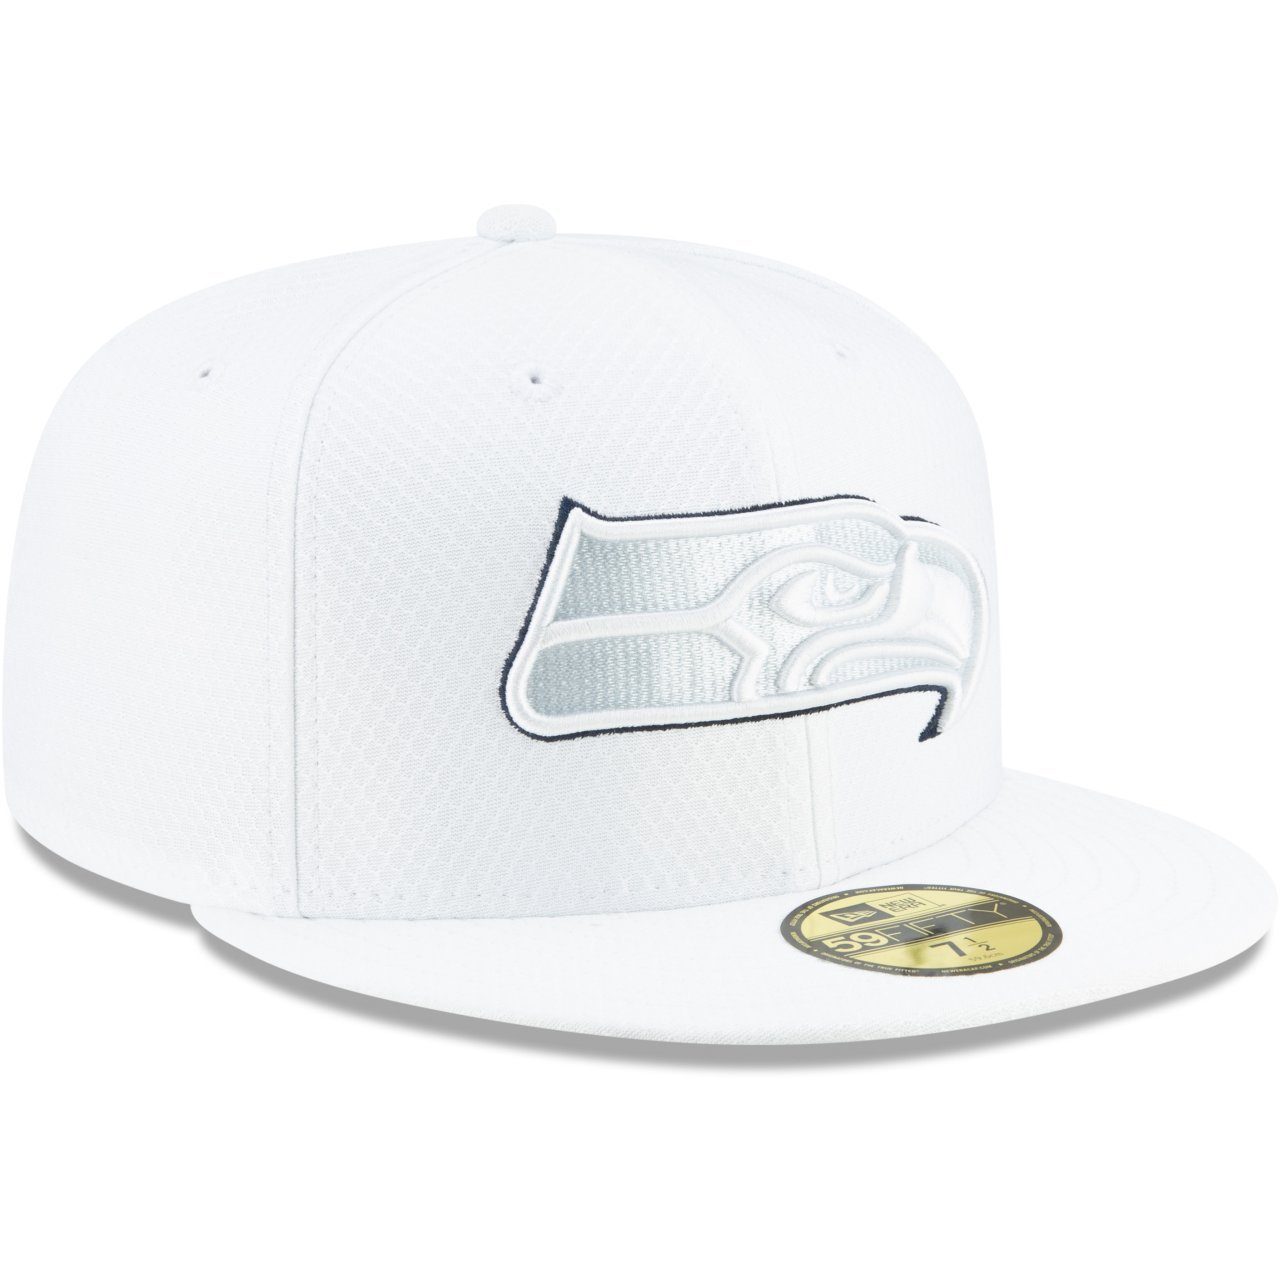 New Era Fitted Cap 59Fifty Seahawks Seattle NFL Sideline PLATINUM